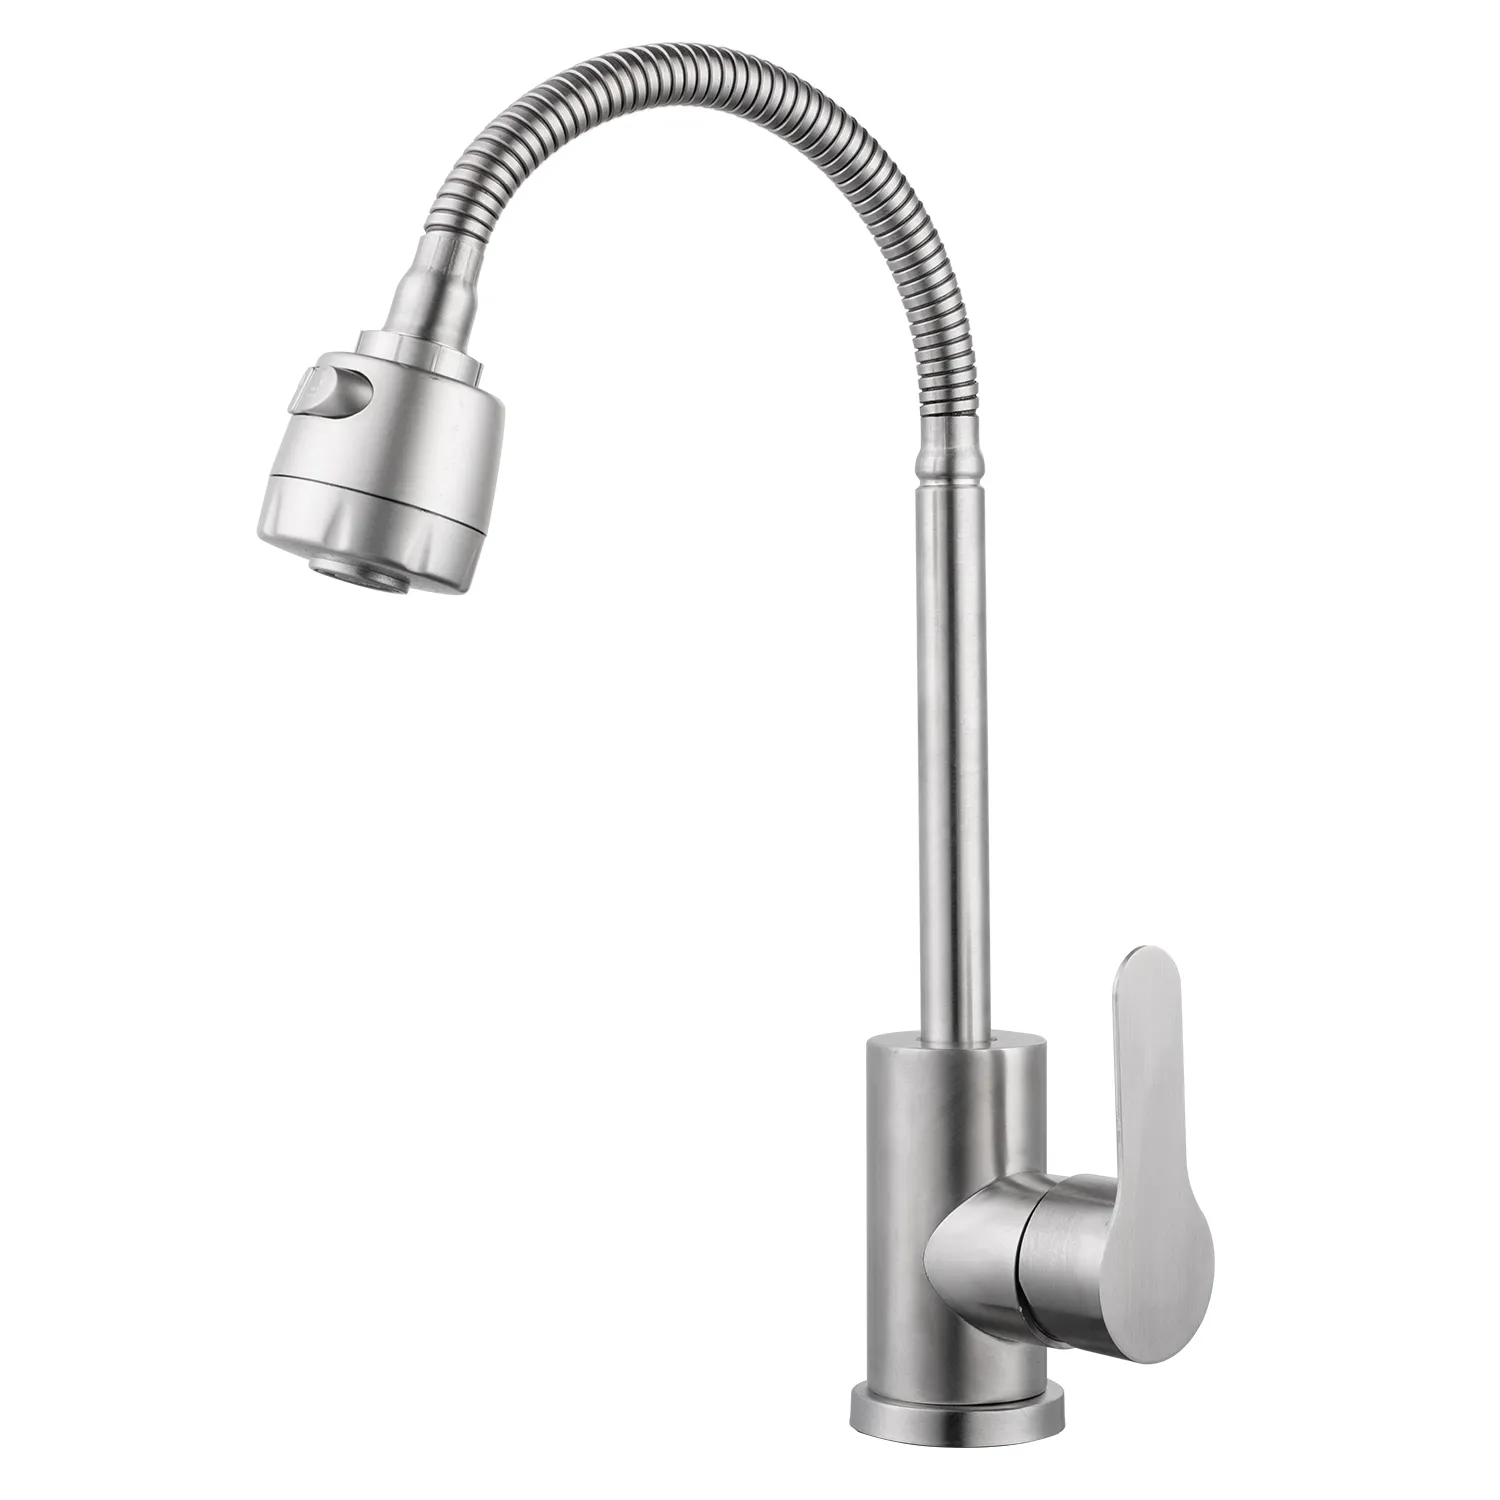 TB-SS401 Tengbo 304 stainless steel Hot And Cold Taps Water Mixer Faucets Taps Sus304 Stainless Steel Kitchen Mixer Tap